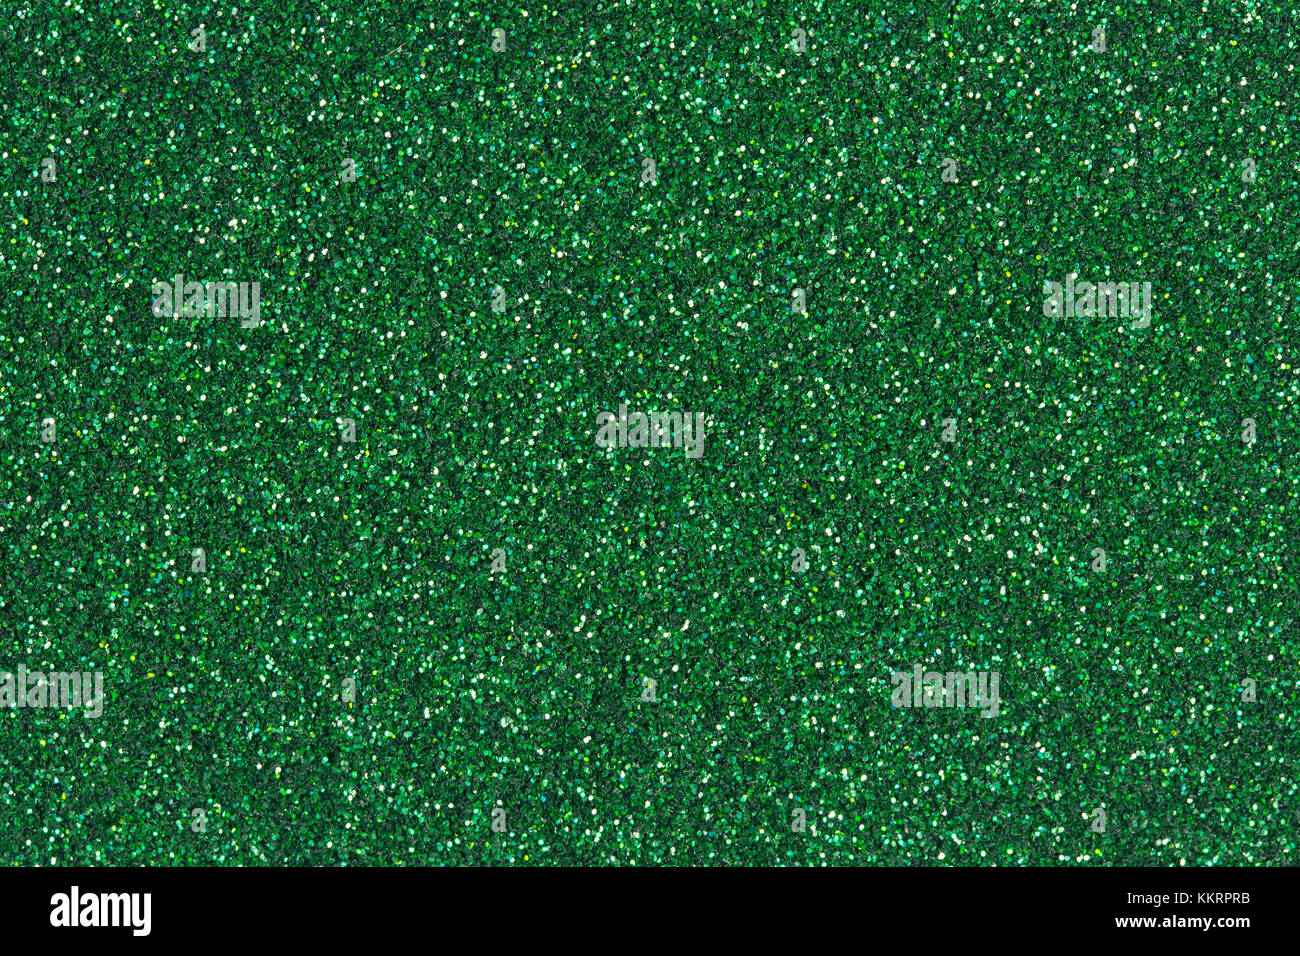 Emerald green glitter texture or background. Stock Photo